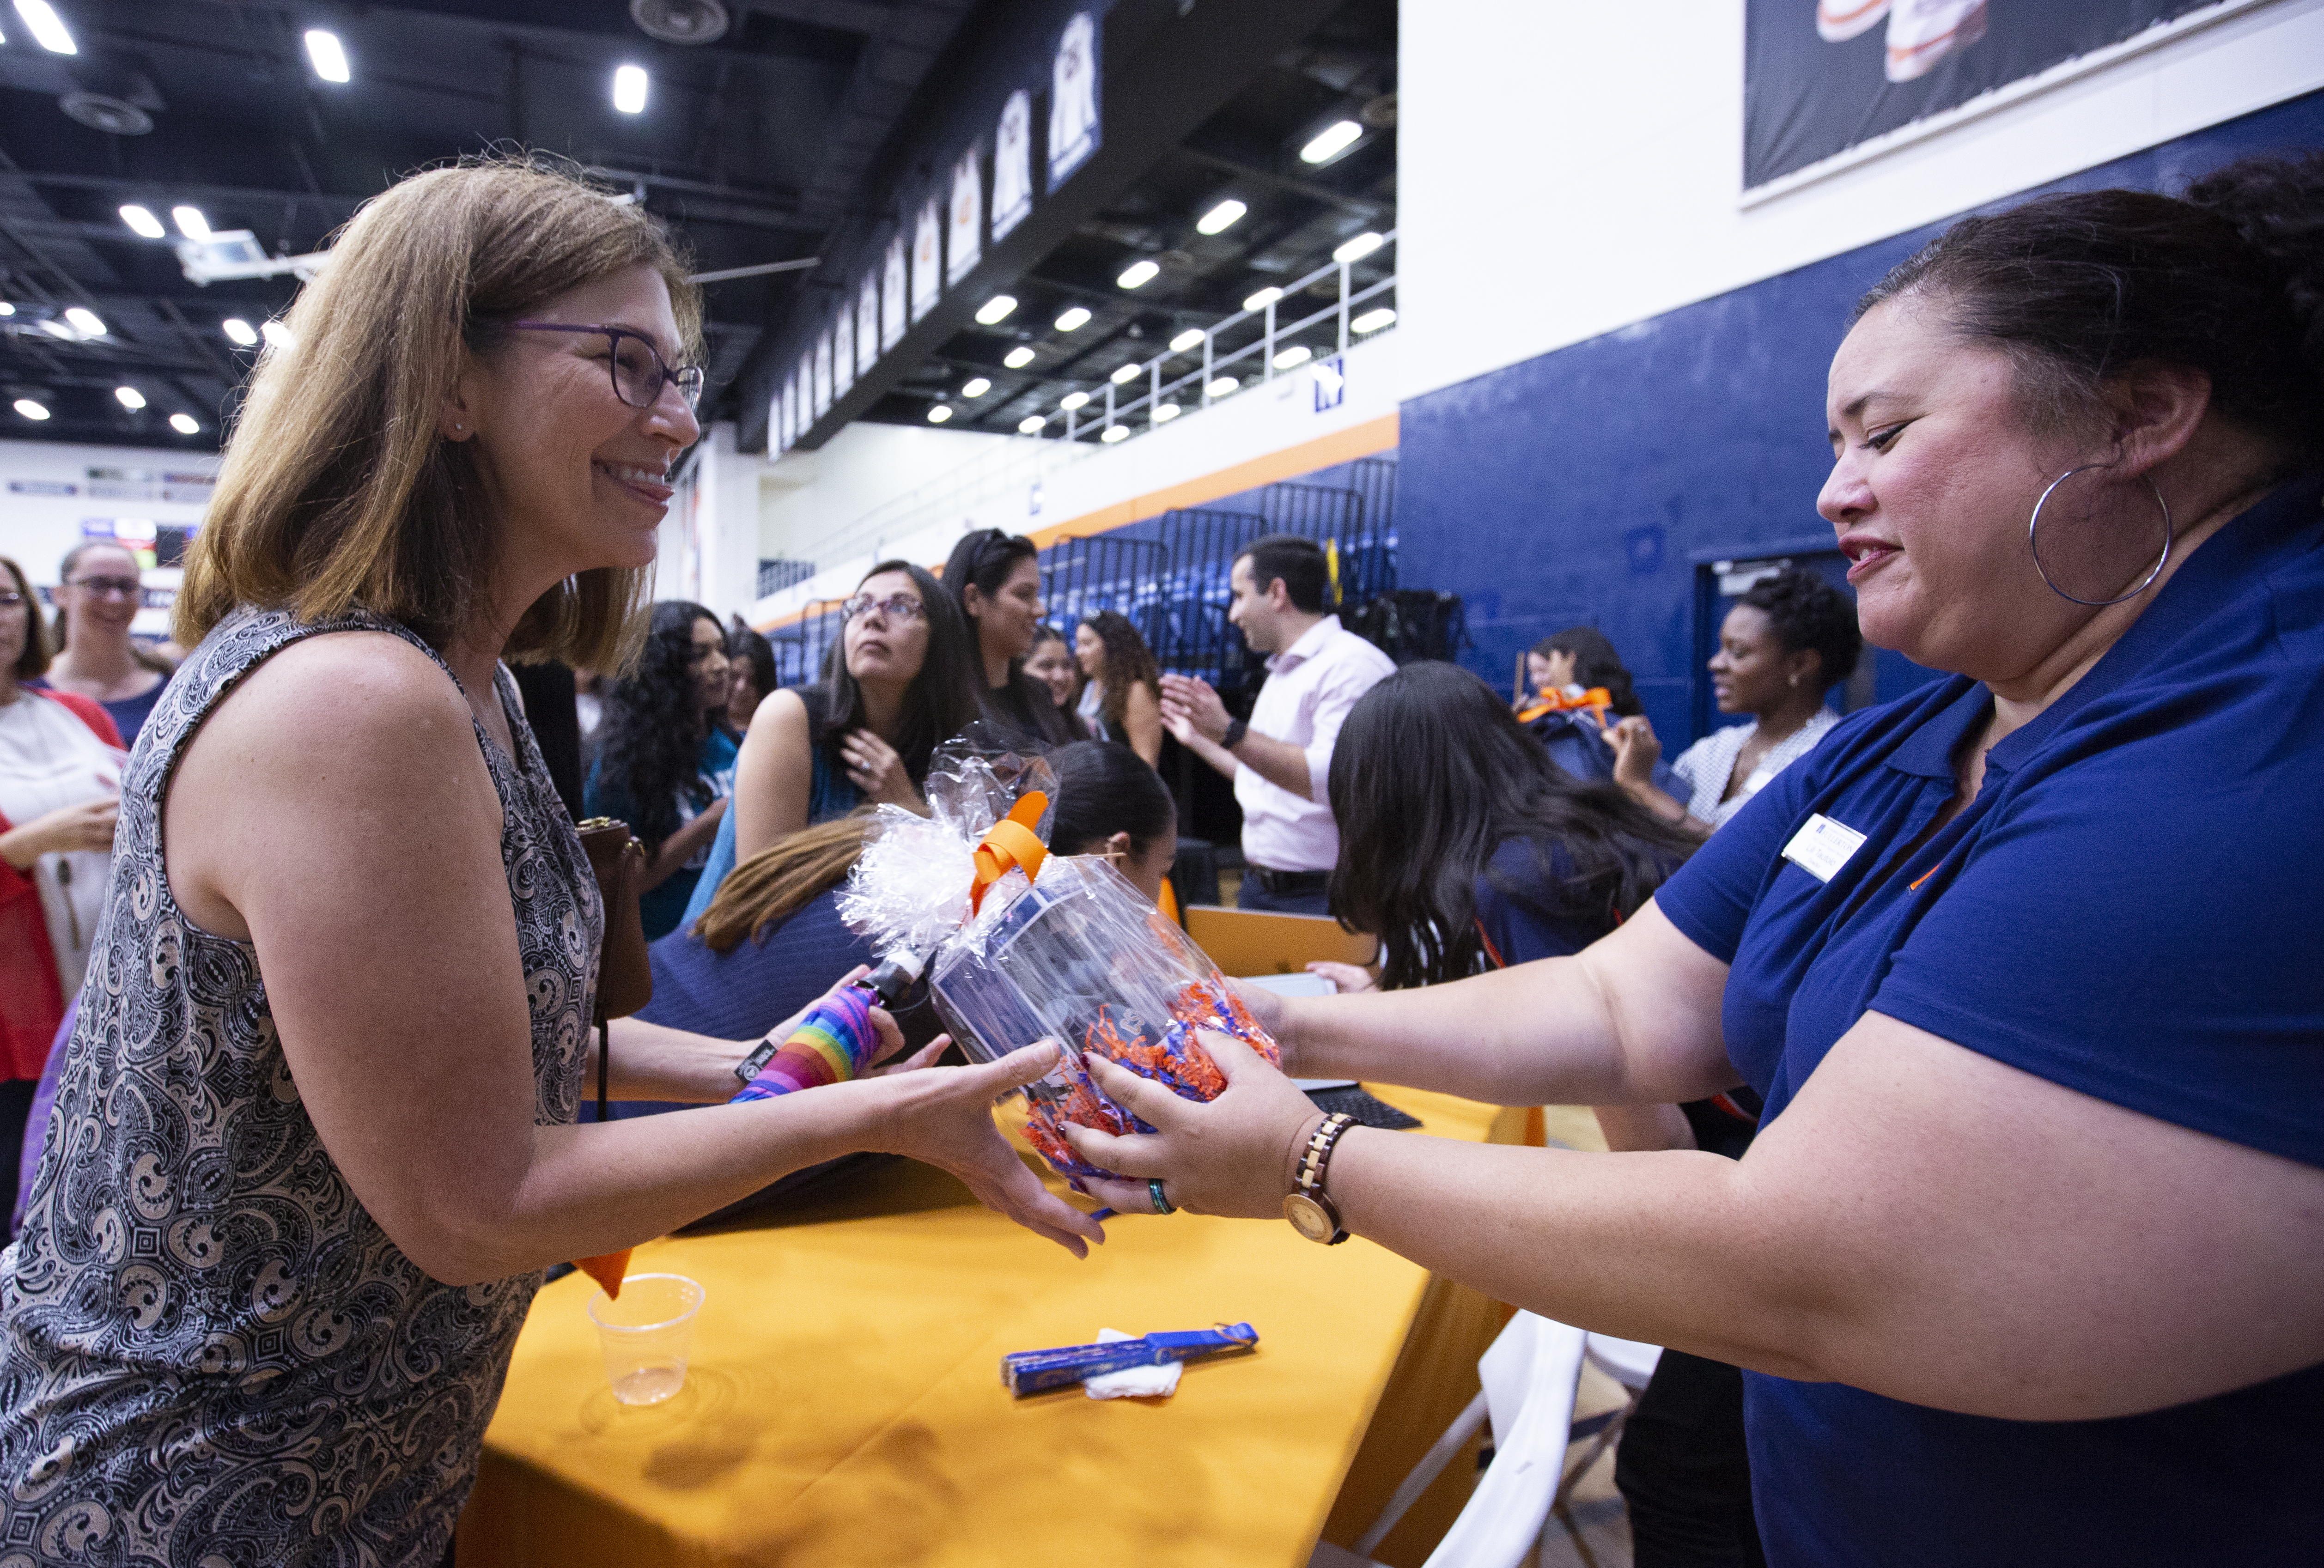 a woman handing another woman a gift at an event